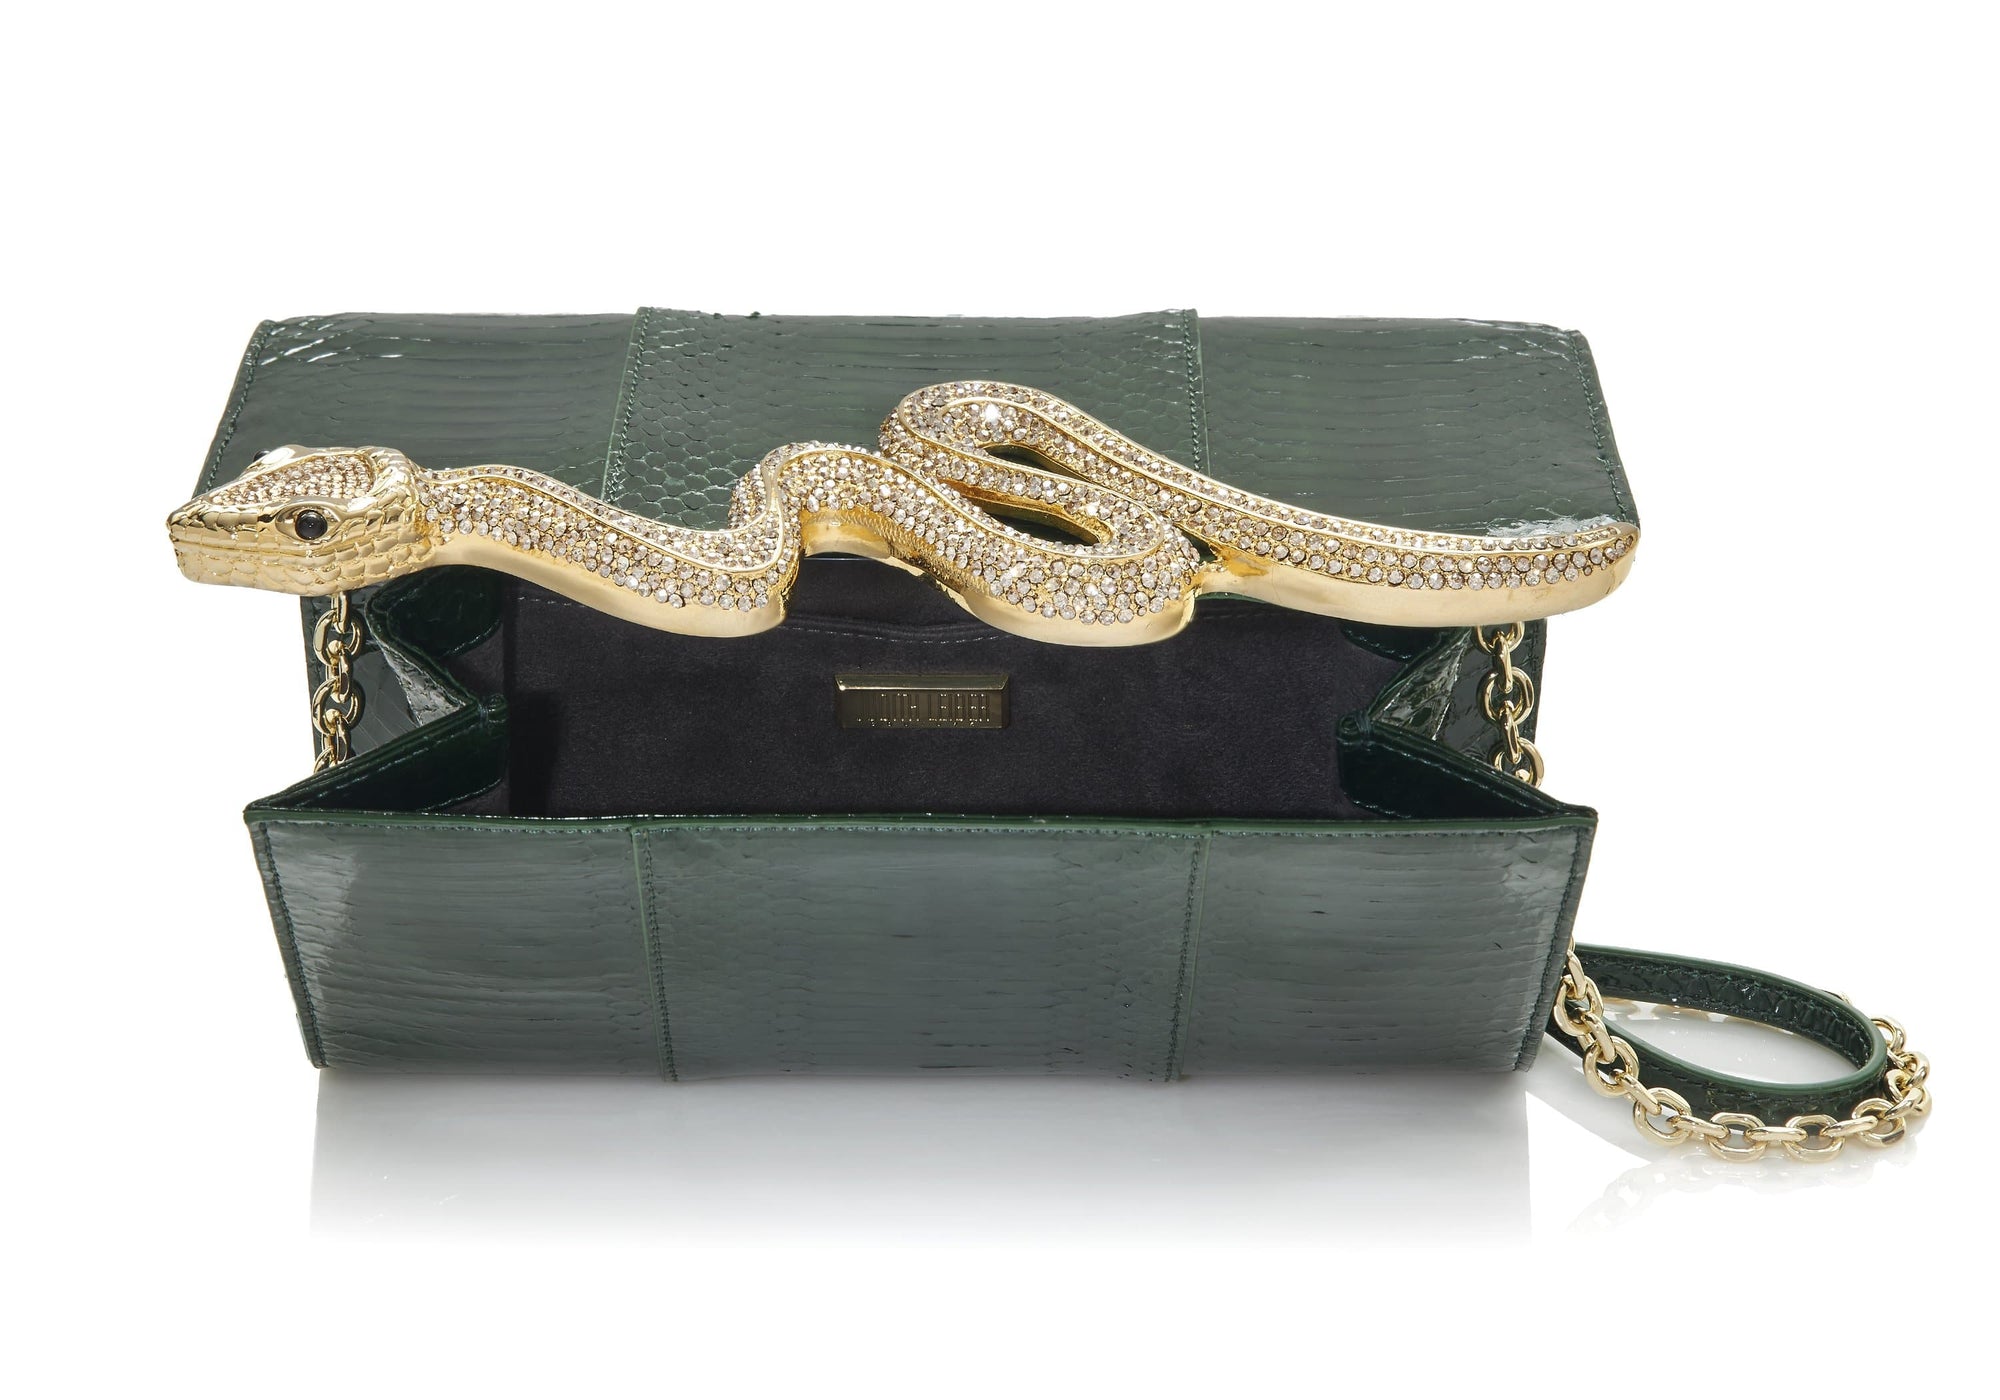 Boutique CHLOE Gold and pink metallic snakeskin leather evening clutch  Retail price €950